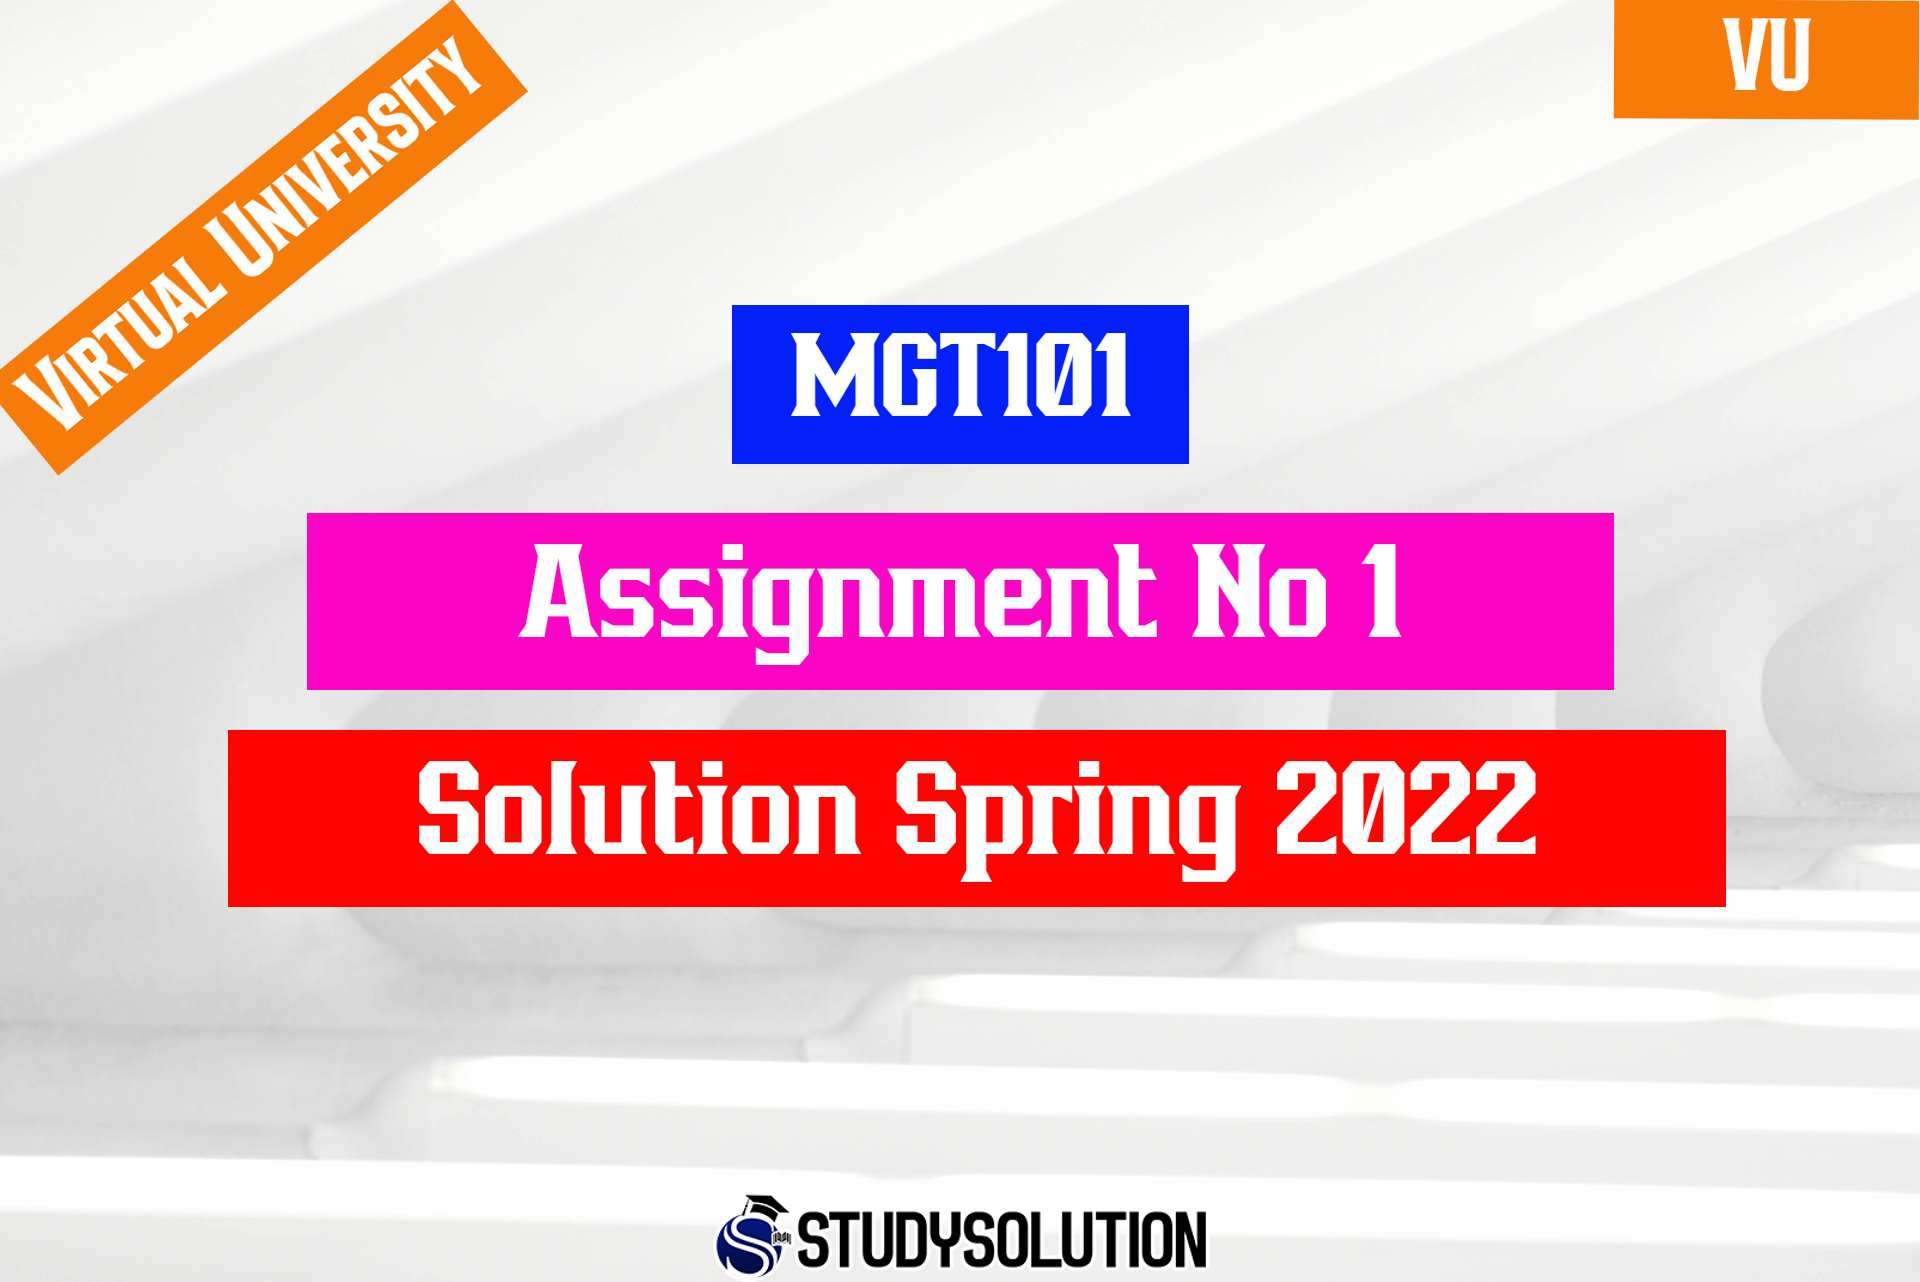 MGT101 Assignment No 1 Solution Spring 2022